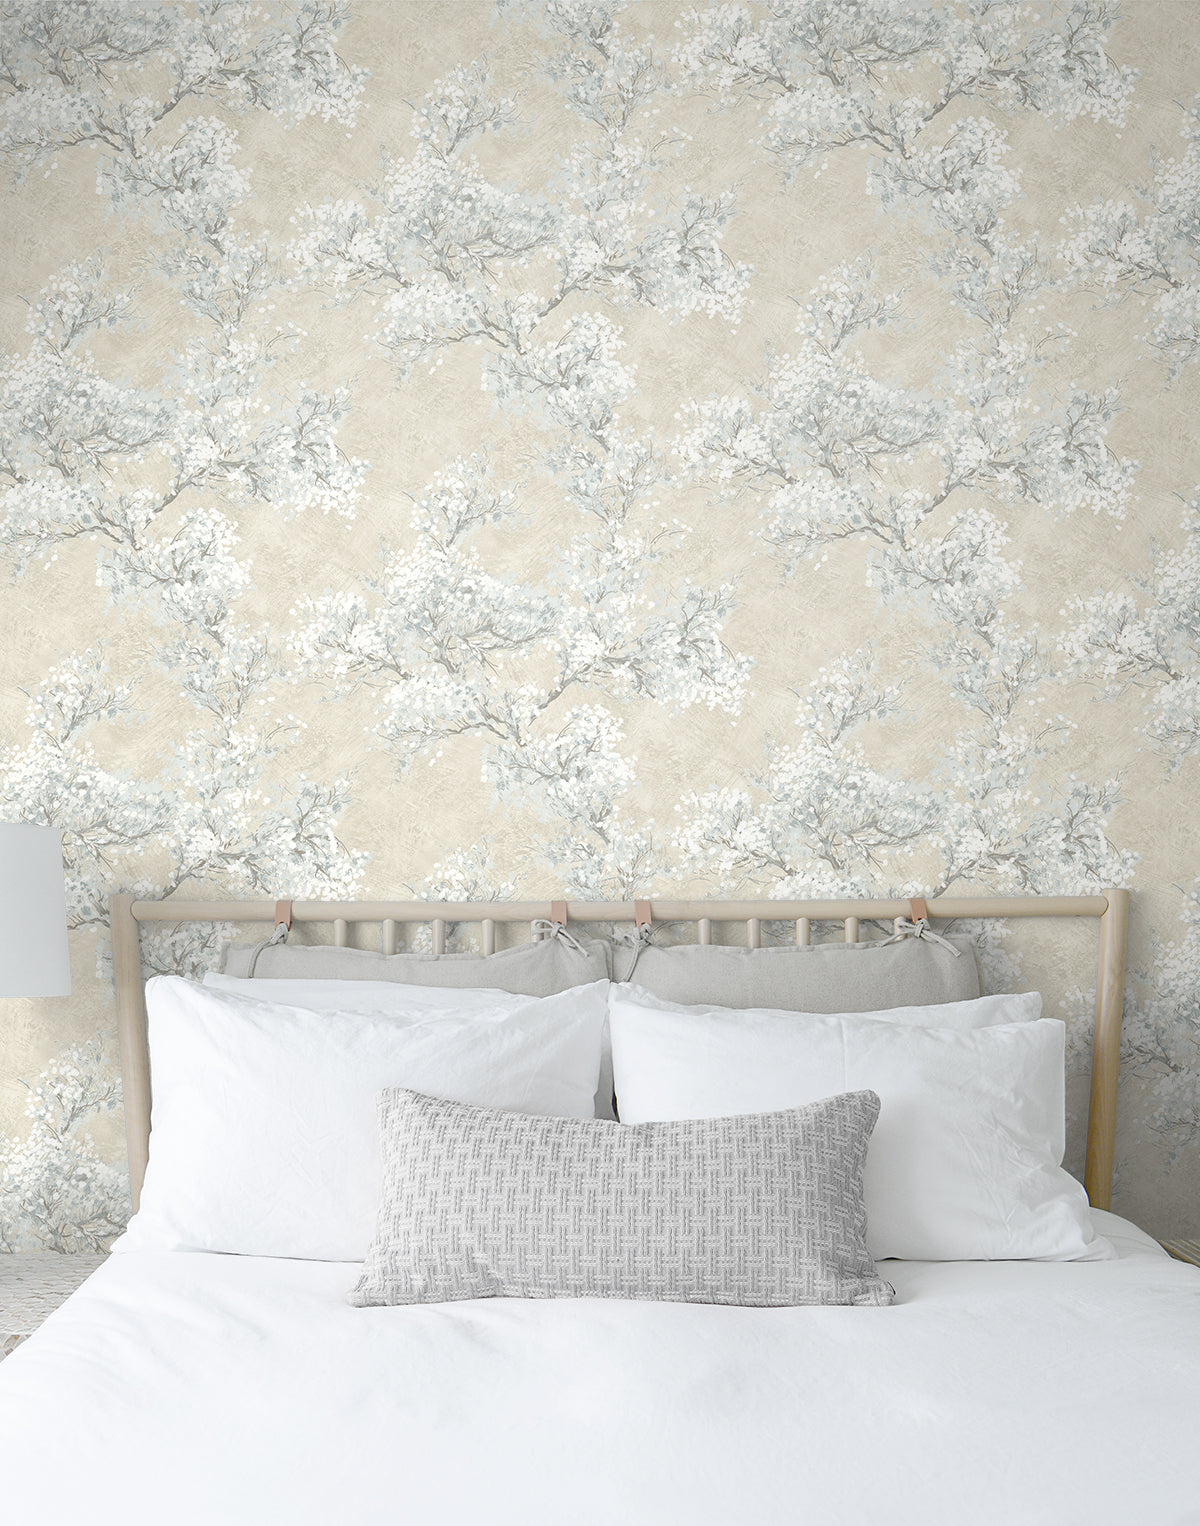 Shop Cherry Blossom Grove Peel-and-Stick Wallpaper in Parchment ...